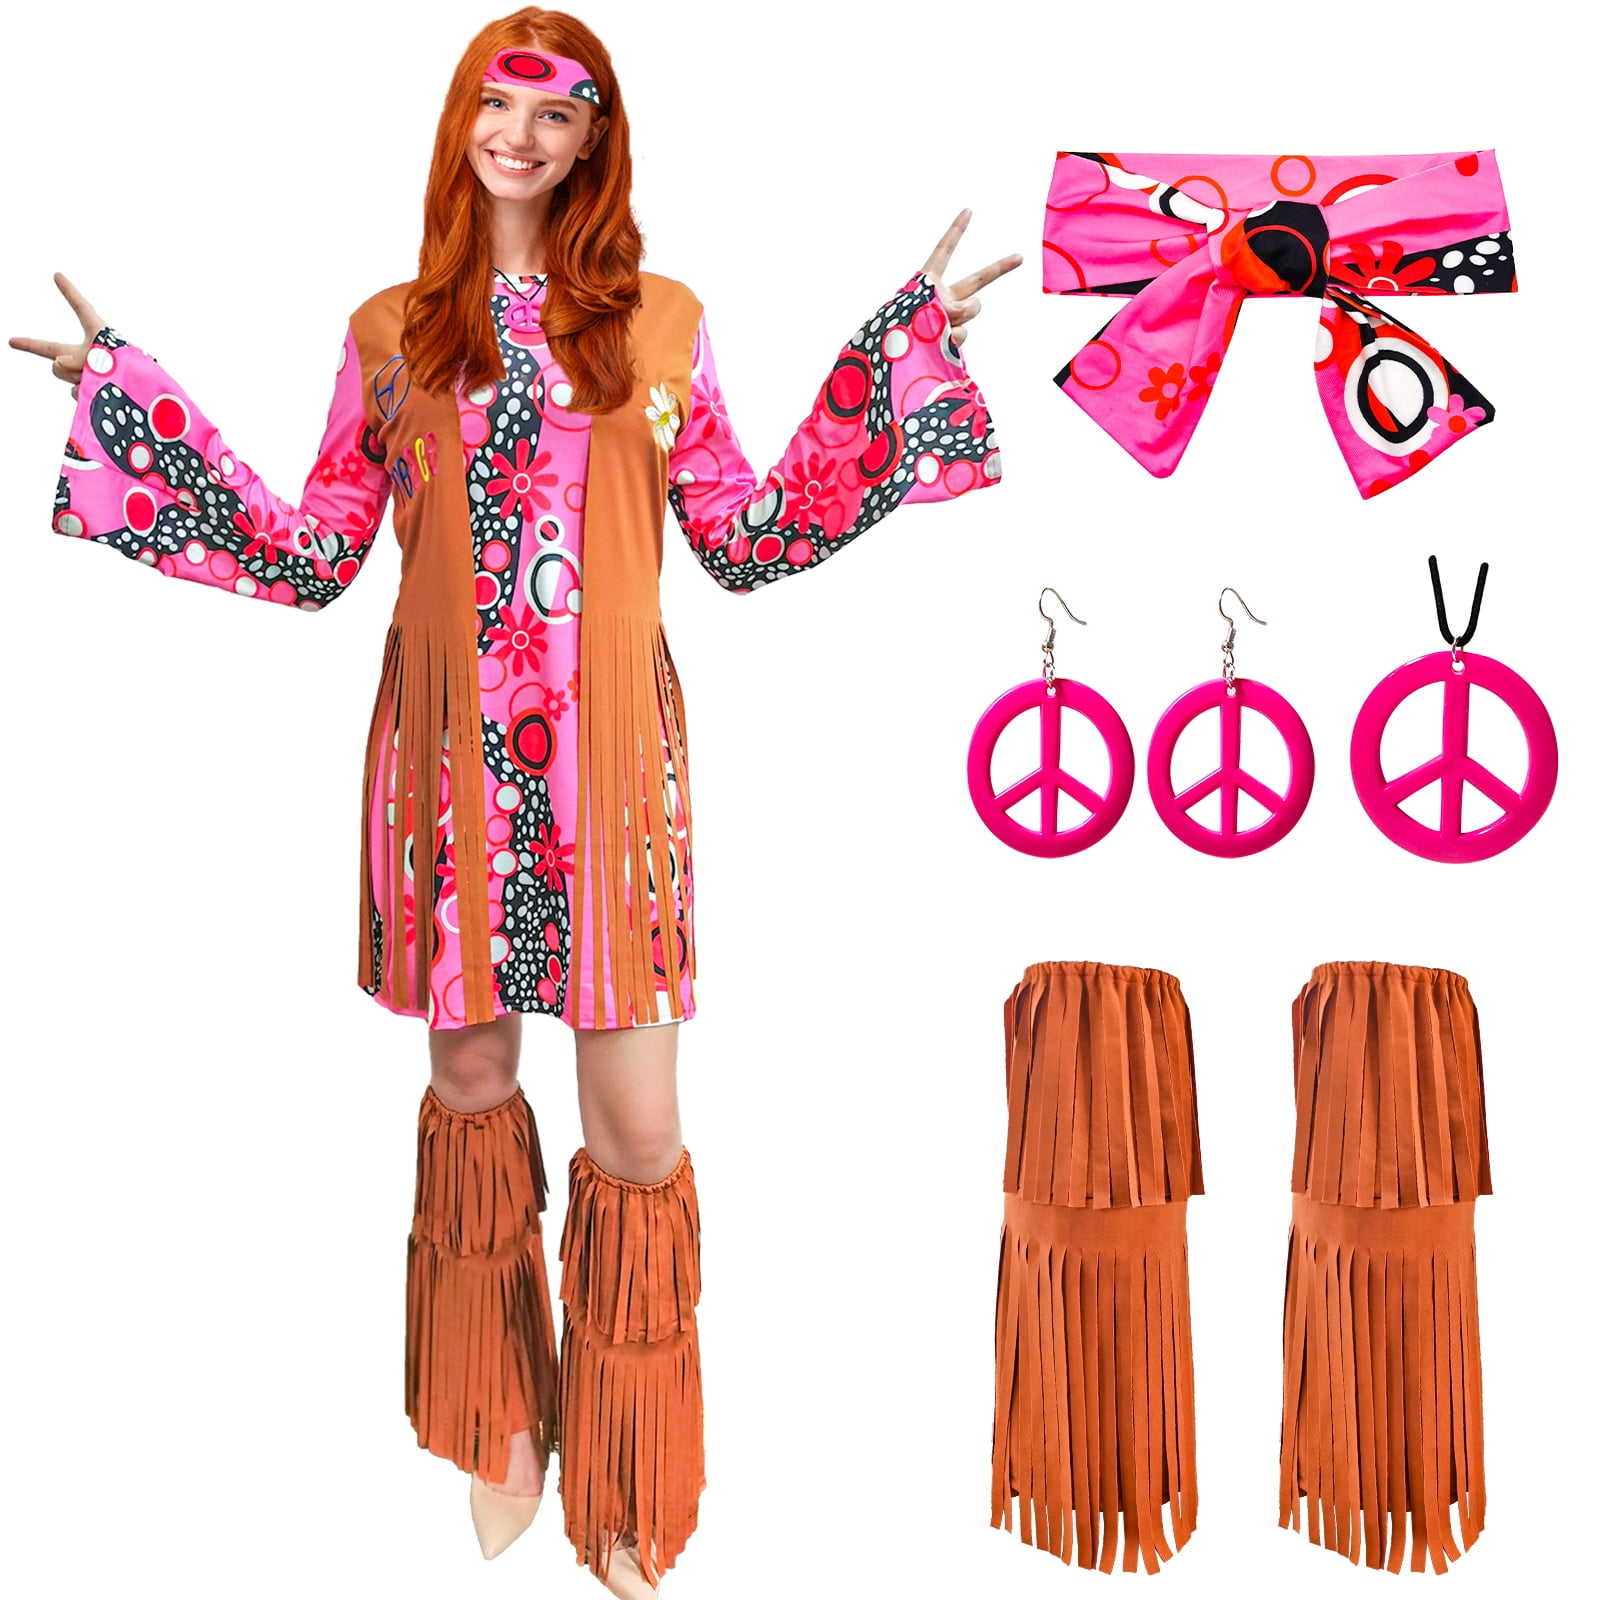 60s 70s Hippie Costume Outfits Hippy Clothes Disco Dress Adult Costume For  Women,60s 70s Party Costume,Brown Size Small 